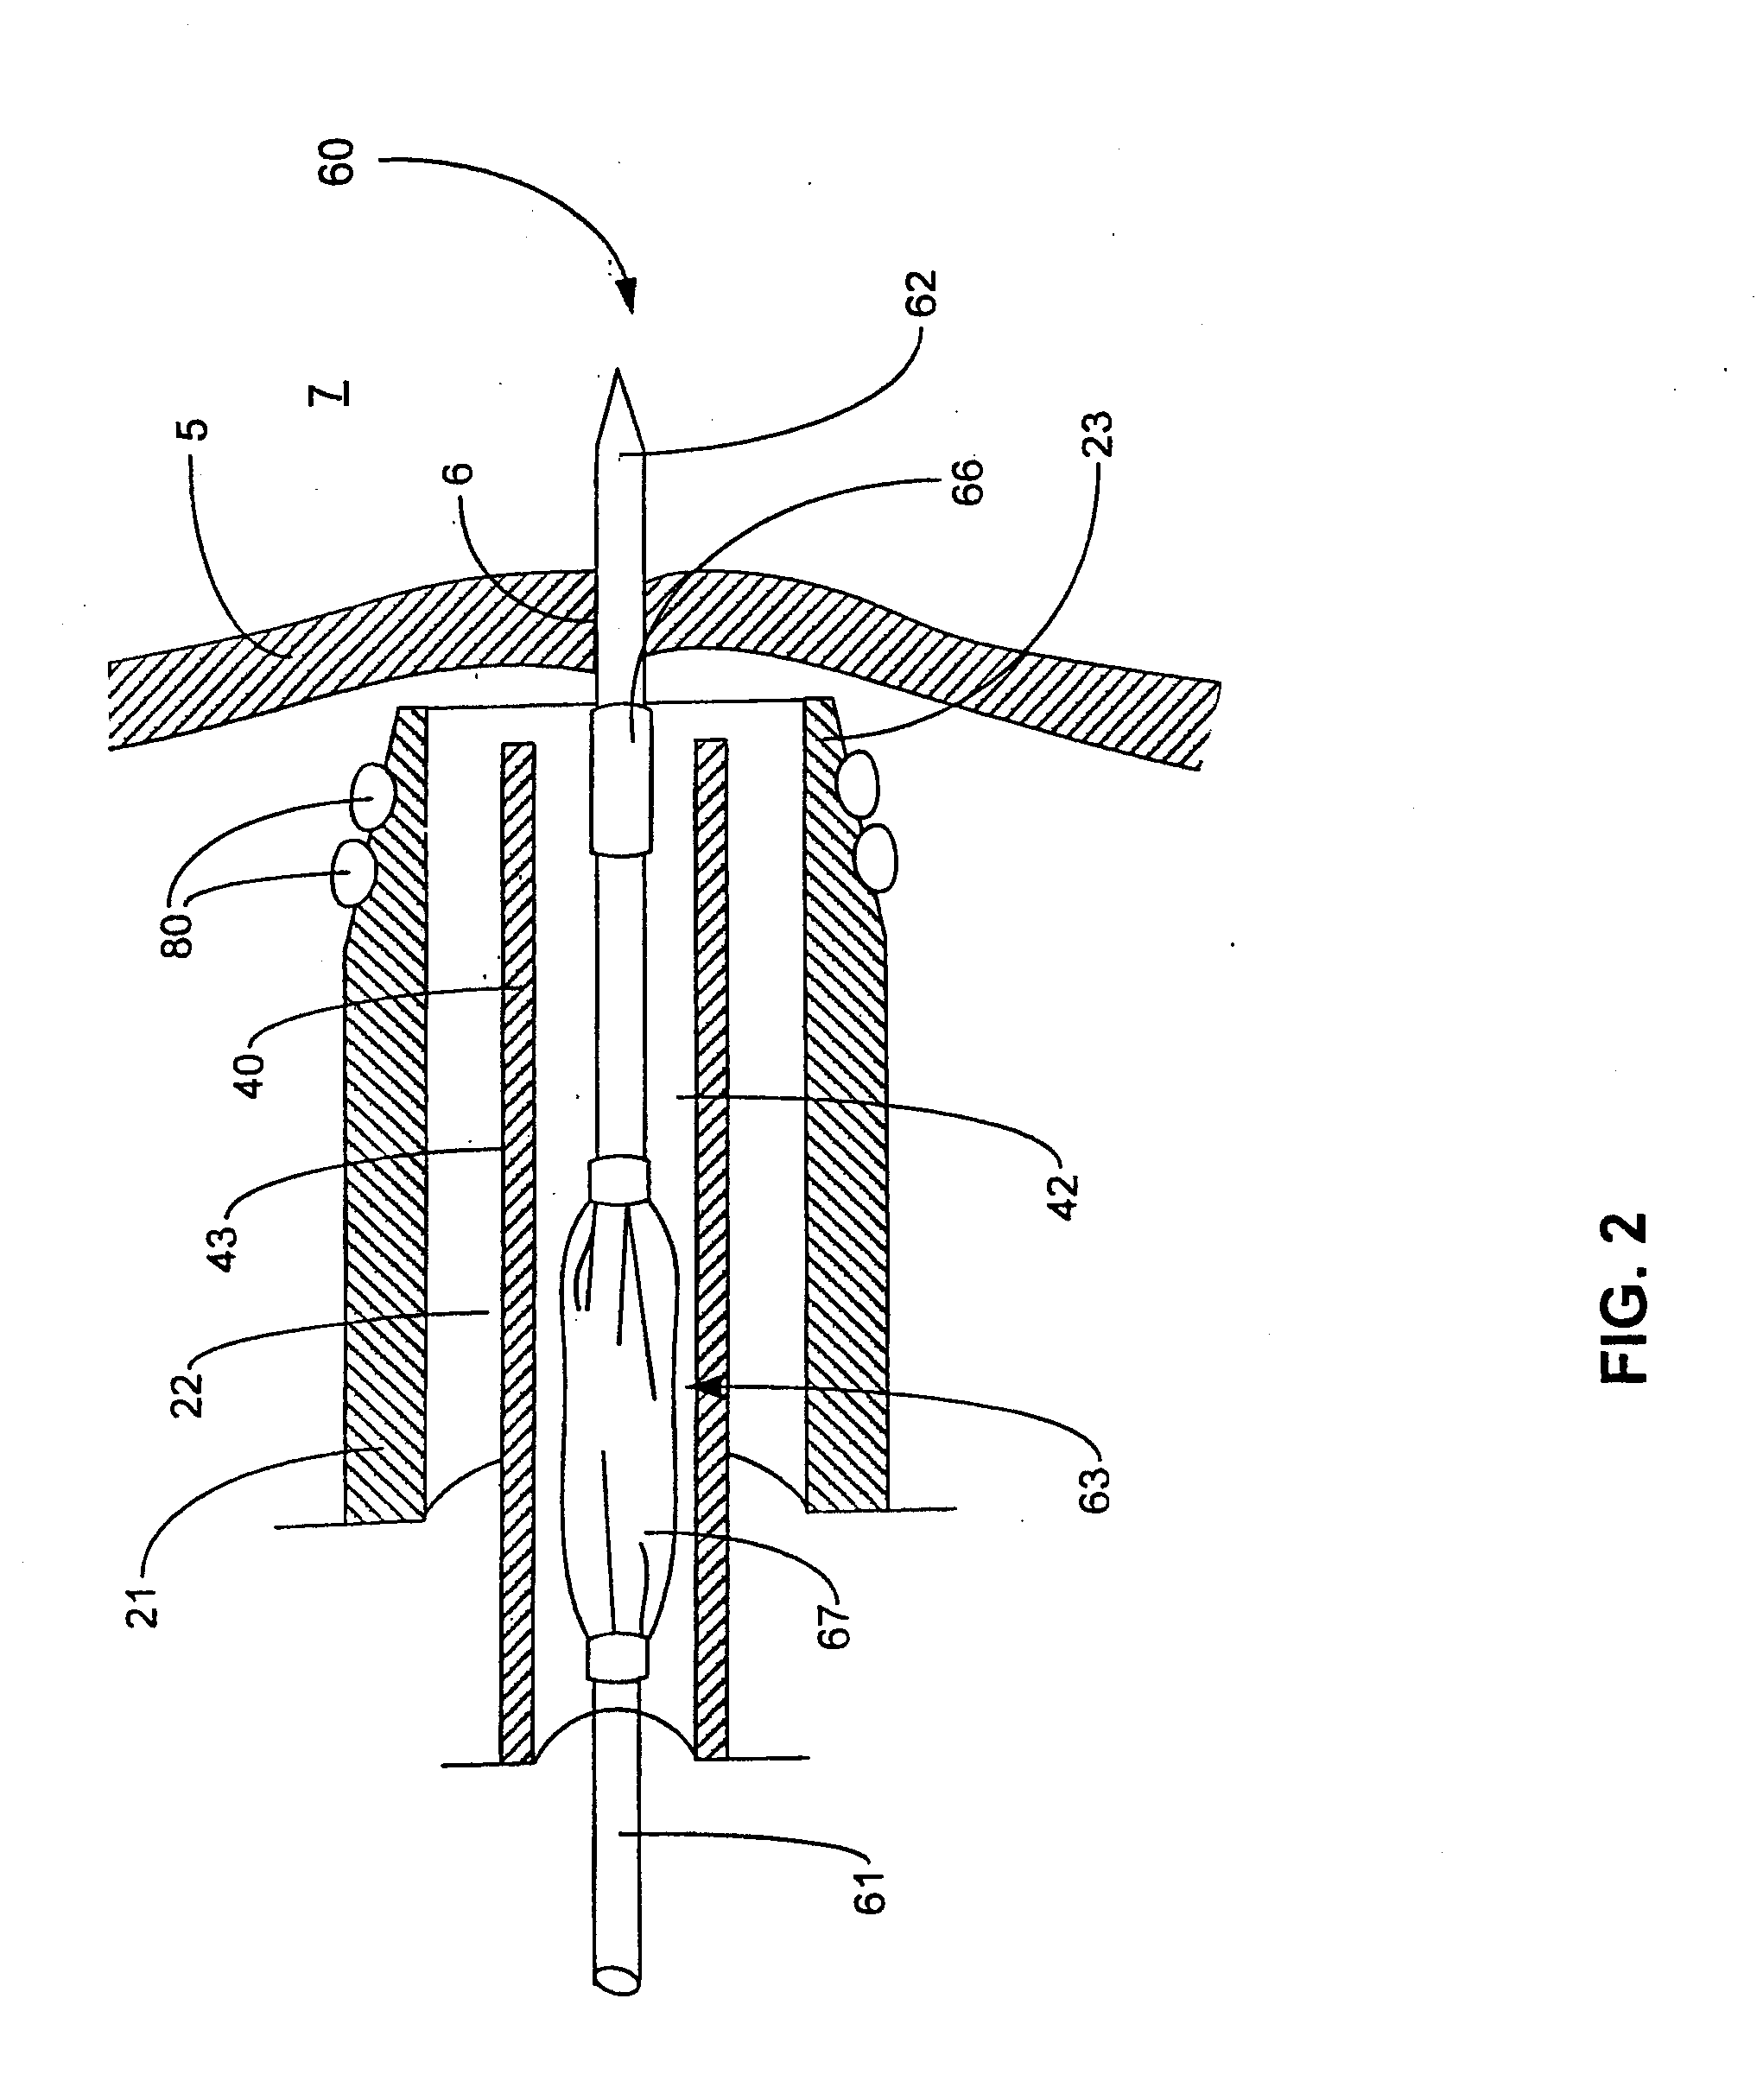 Tissue securing and sealing apparatus and related methods of use